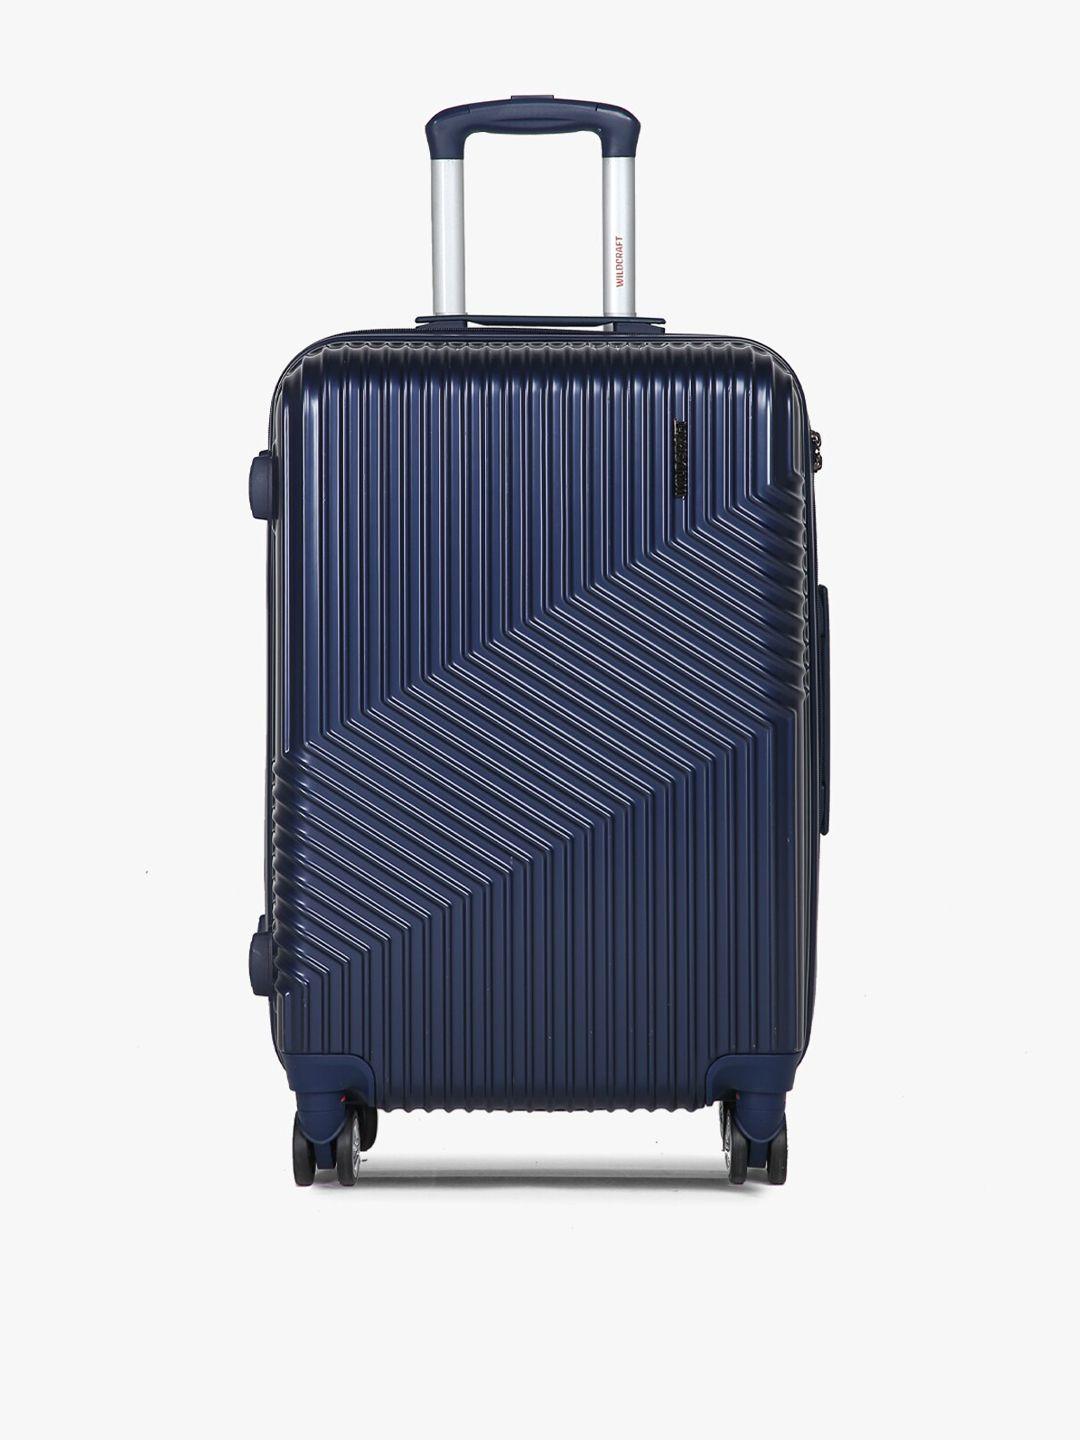 wildcraft unisex navy blue textured hard-sided large trolley suitcase